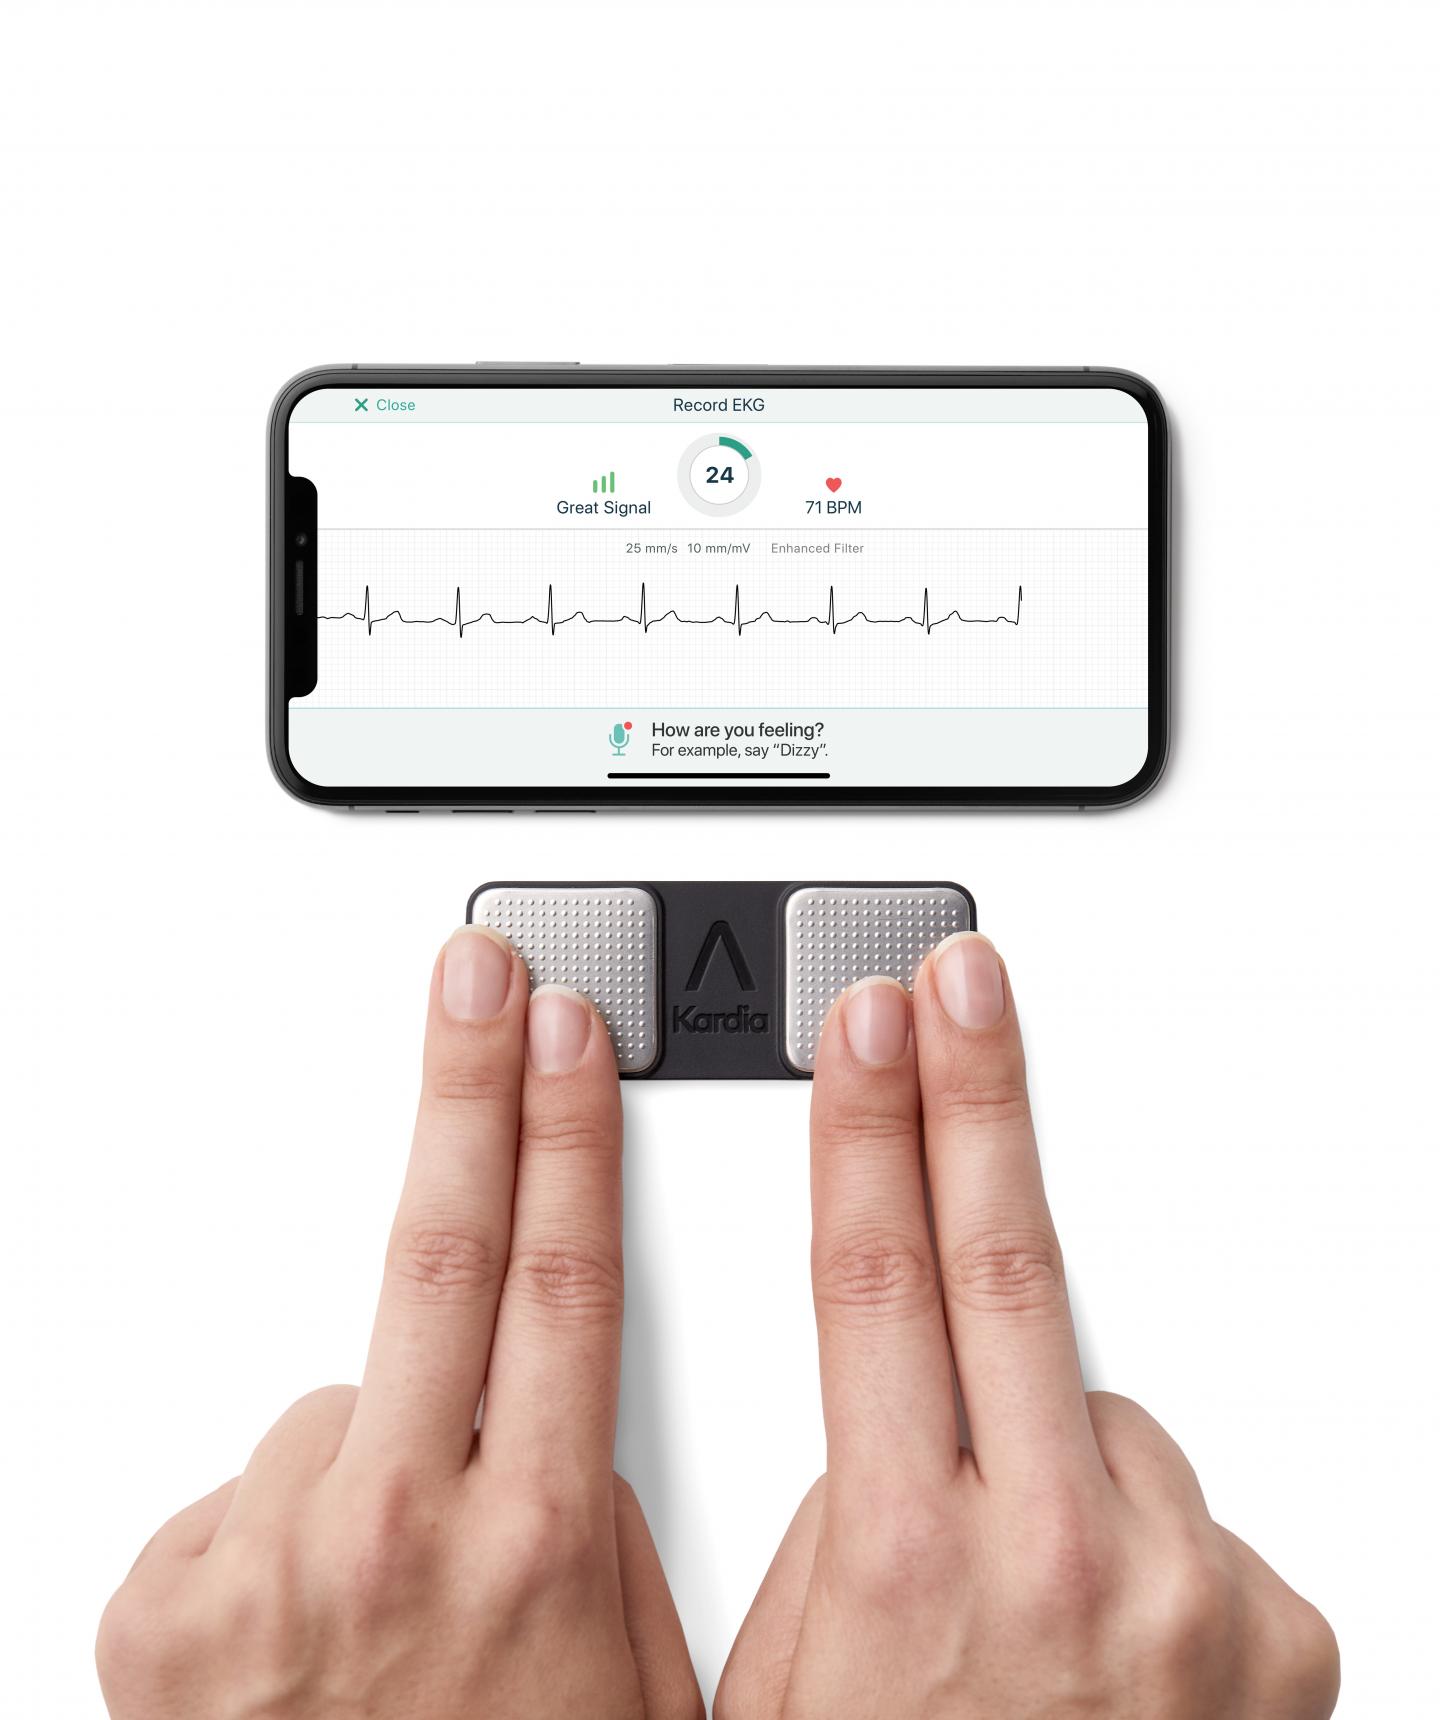 Novel Technology May Enable More Efficient Atrial Fibrillation Monitoring and Detection (1 of 2)